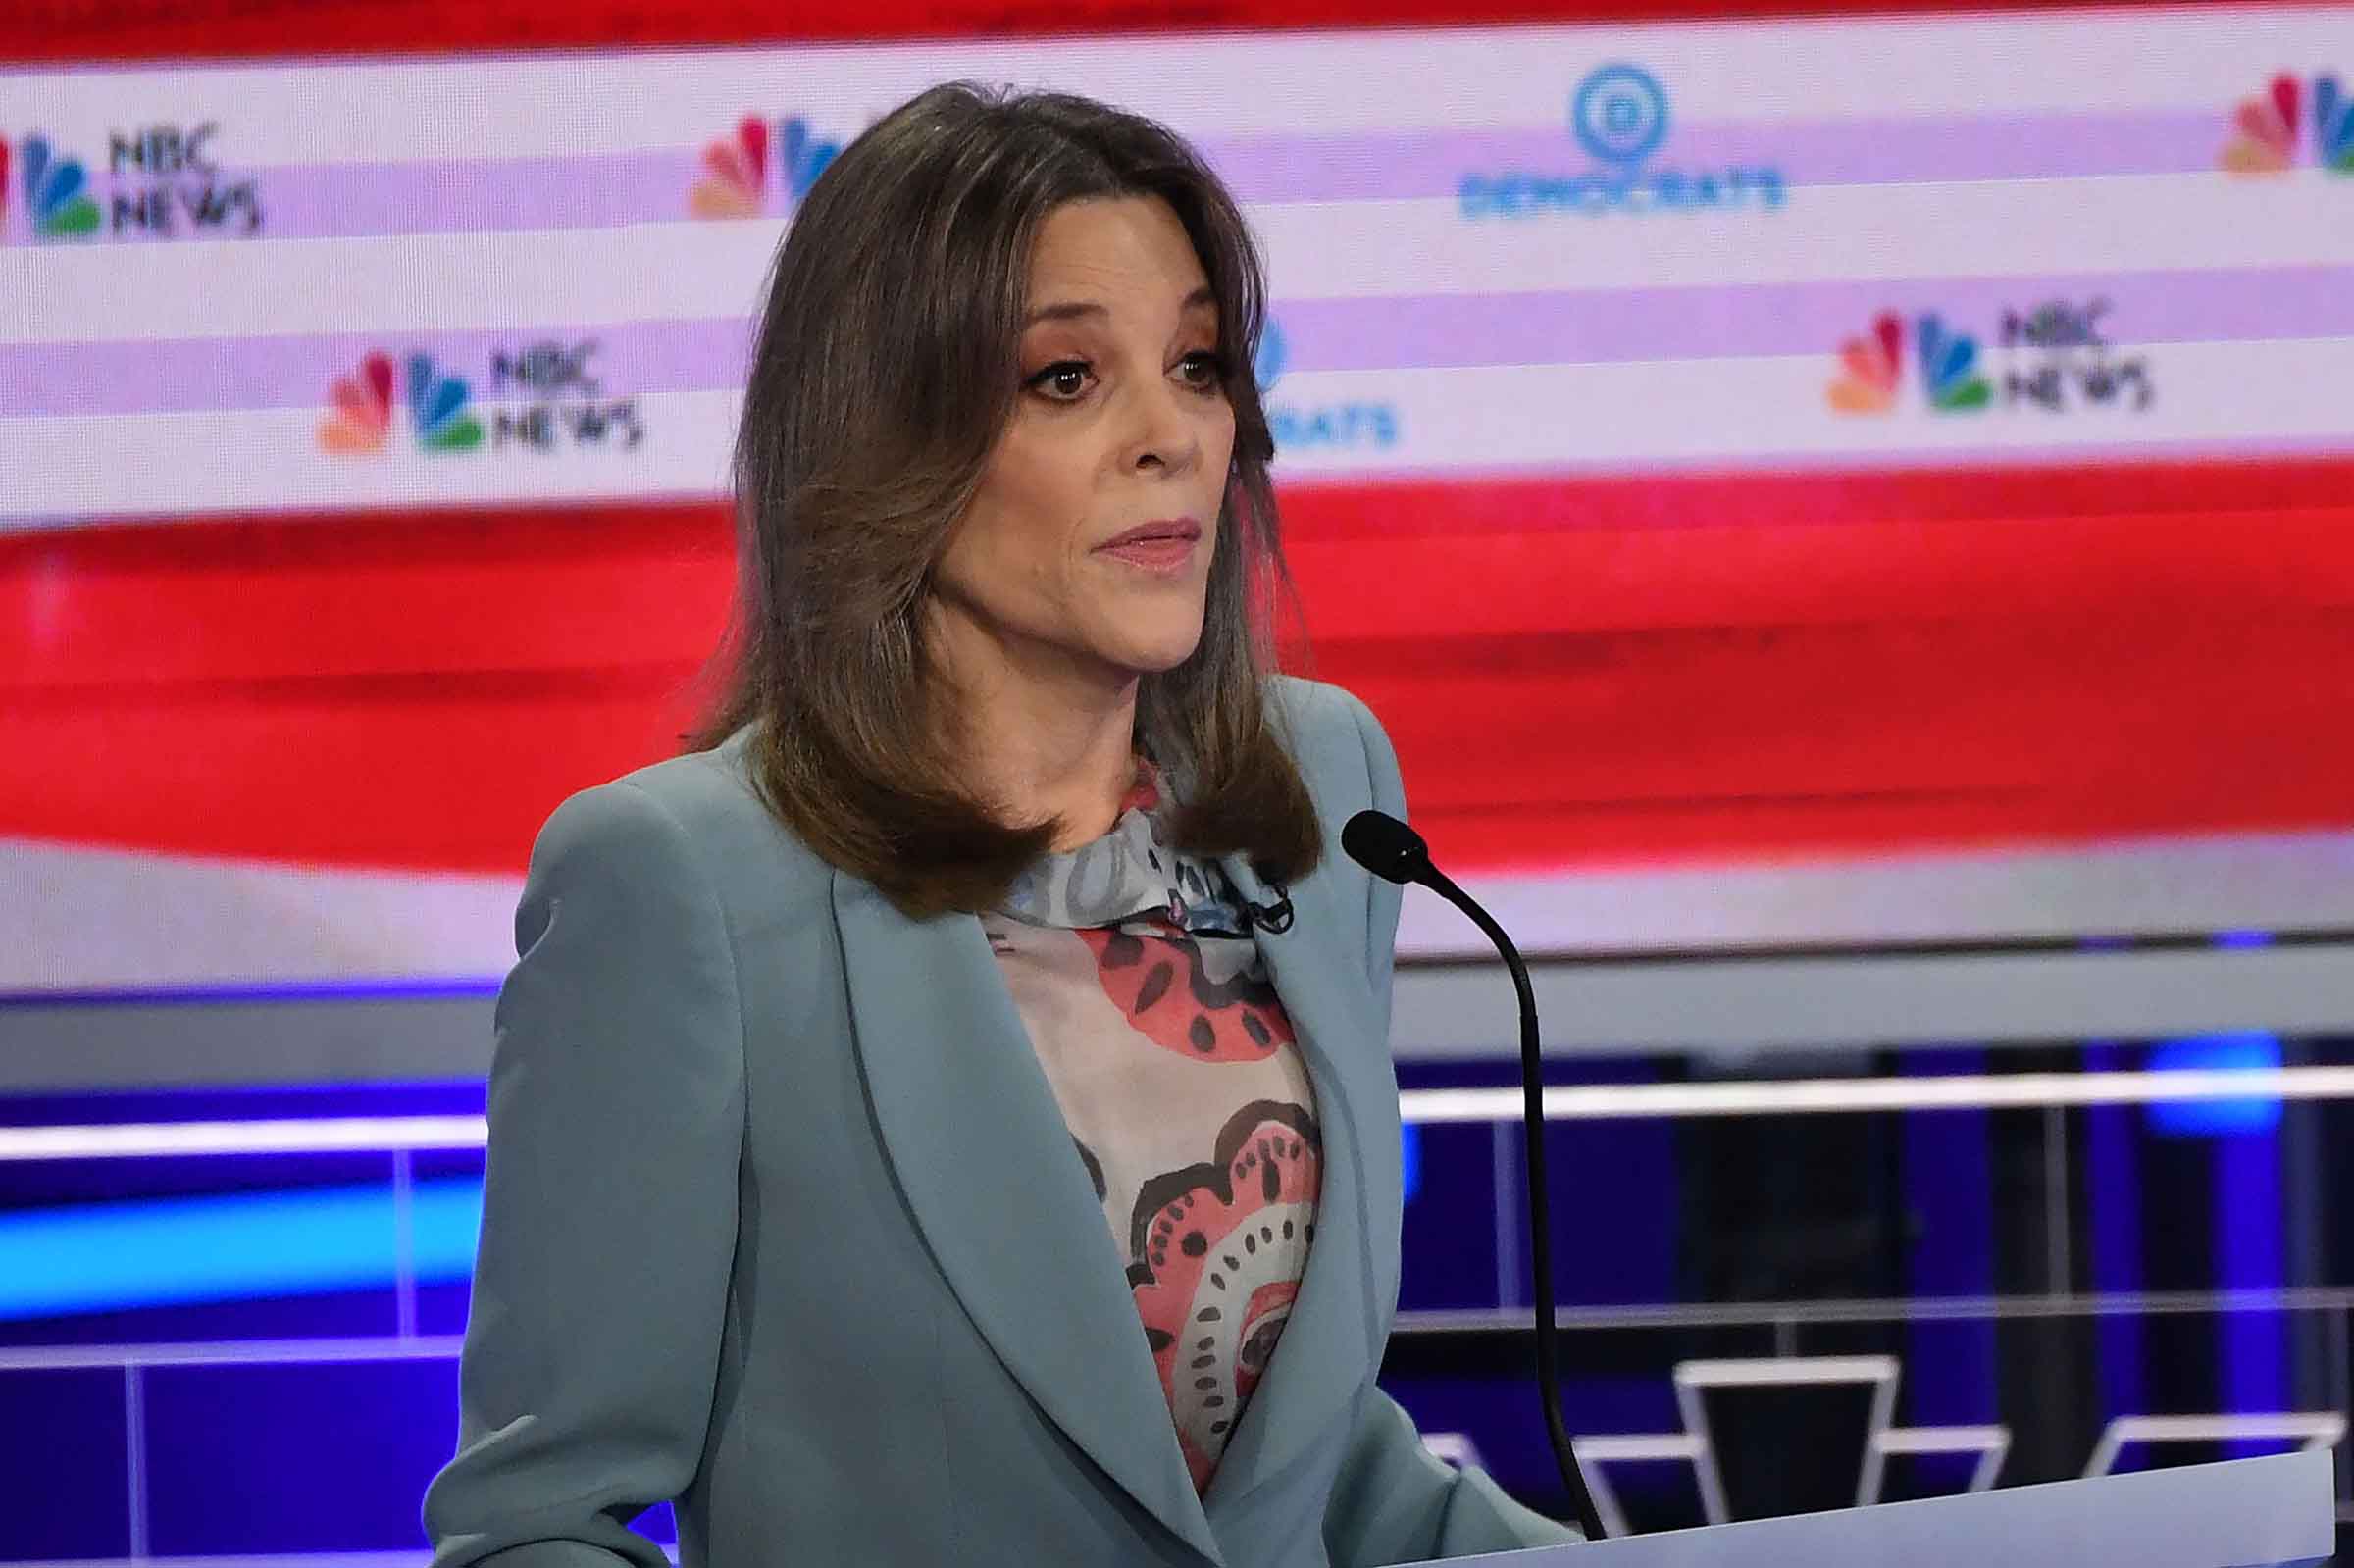 Democratic presidential hopeful US author Marianne Williamson speaks during the second Democratic primary debate of the 2020 presidential campaign season hosted by NBC News at the Adrienne Arsht Center for the Performing Arts in Miami, Florida, June 27, 2019. (Saul Loeb—AFP/Getty Images)